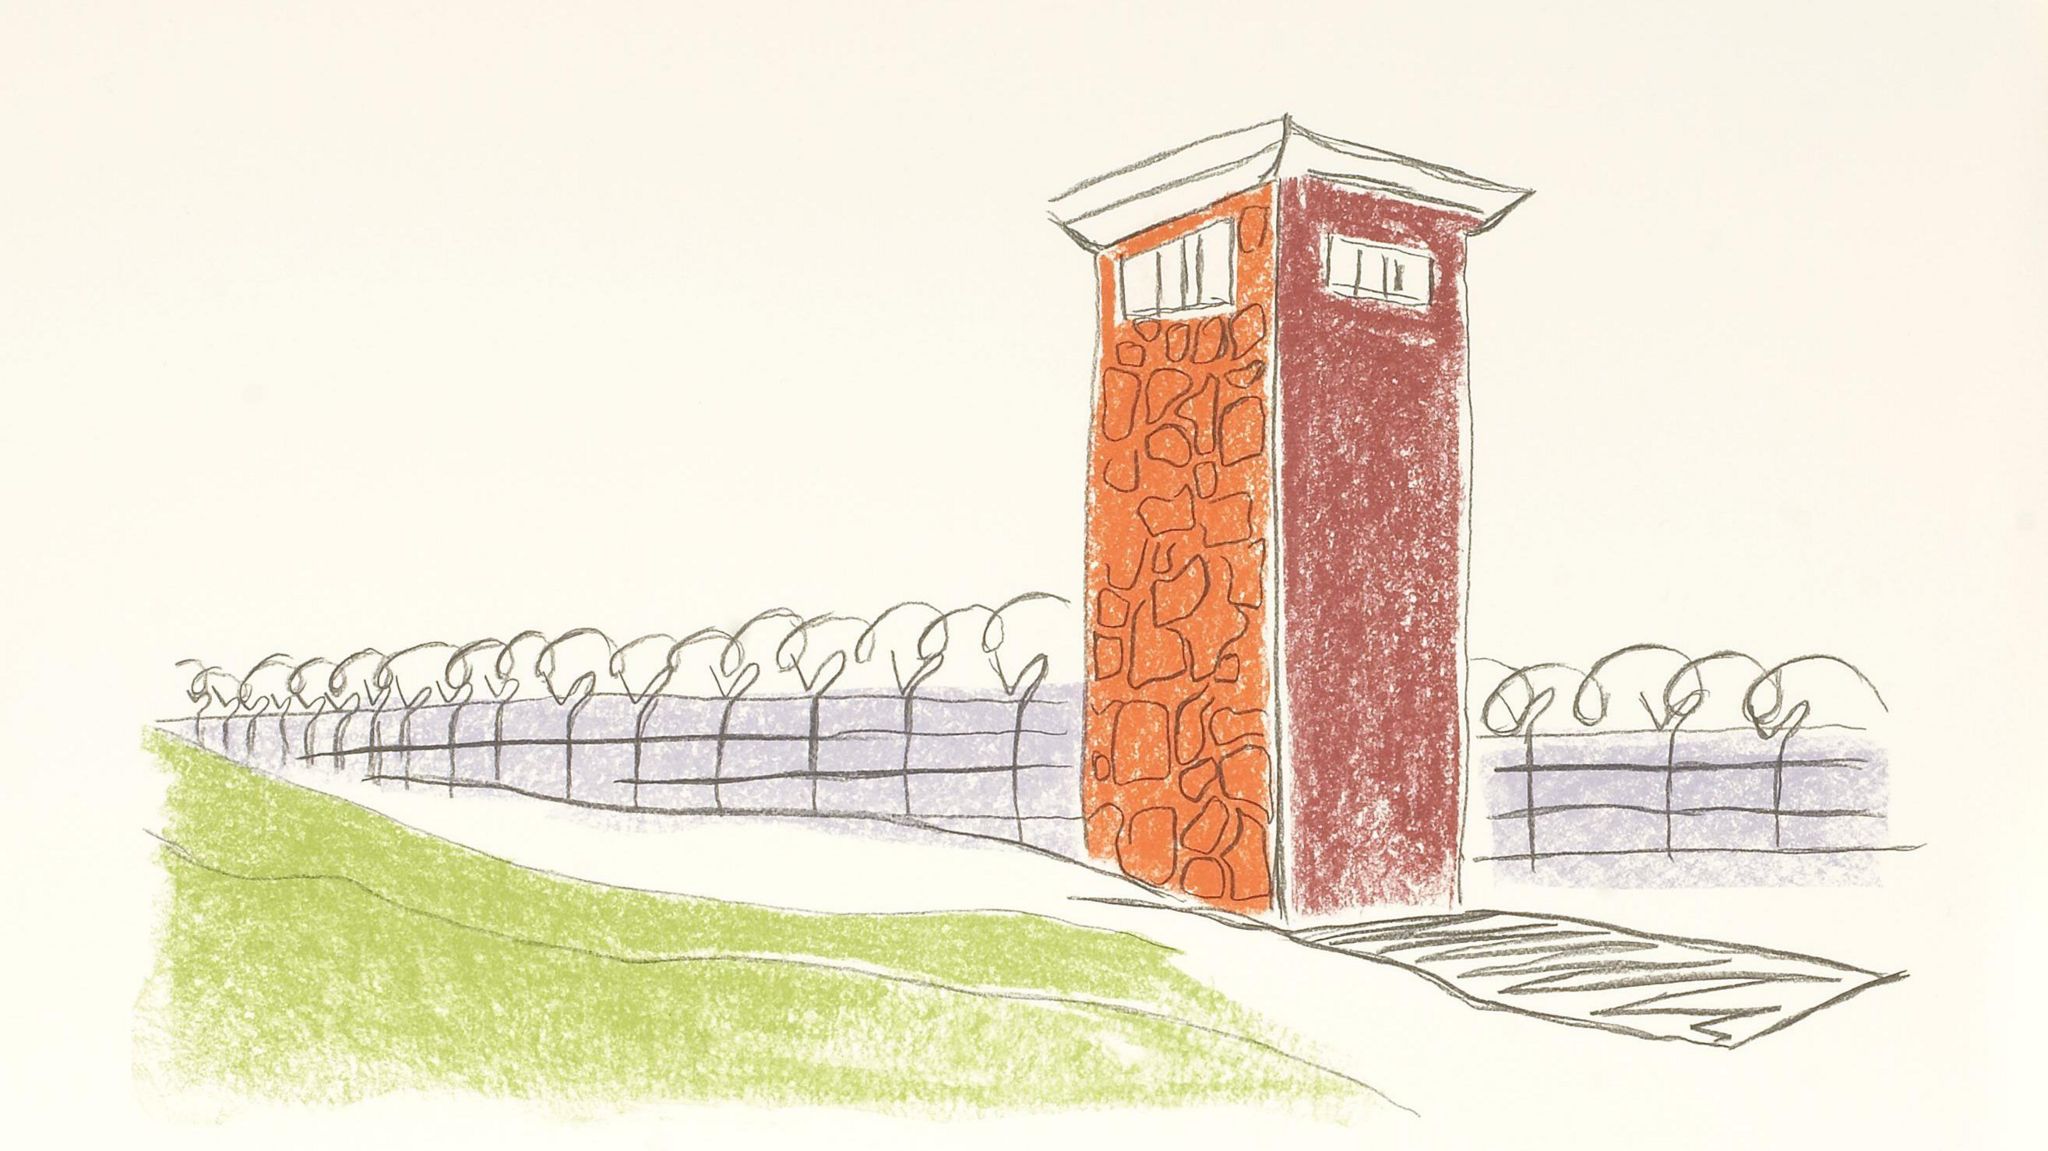 A lithograph showing a brown guard tower, green grass and a barbed wire fence